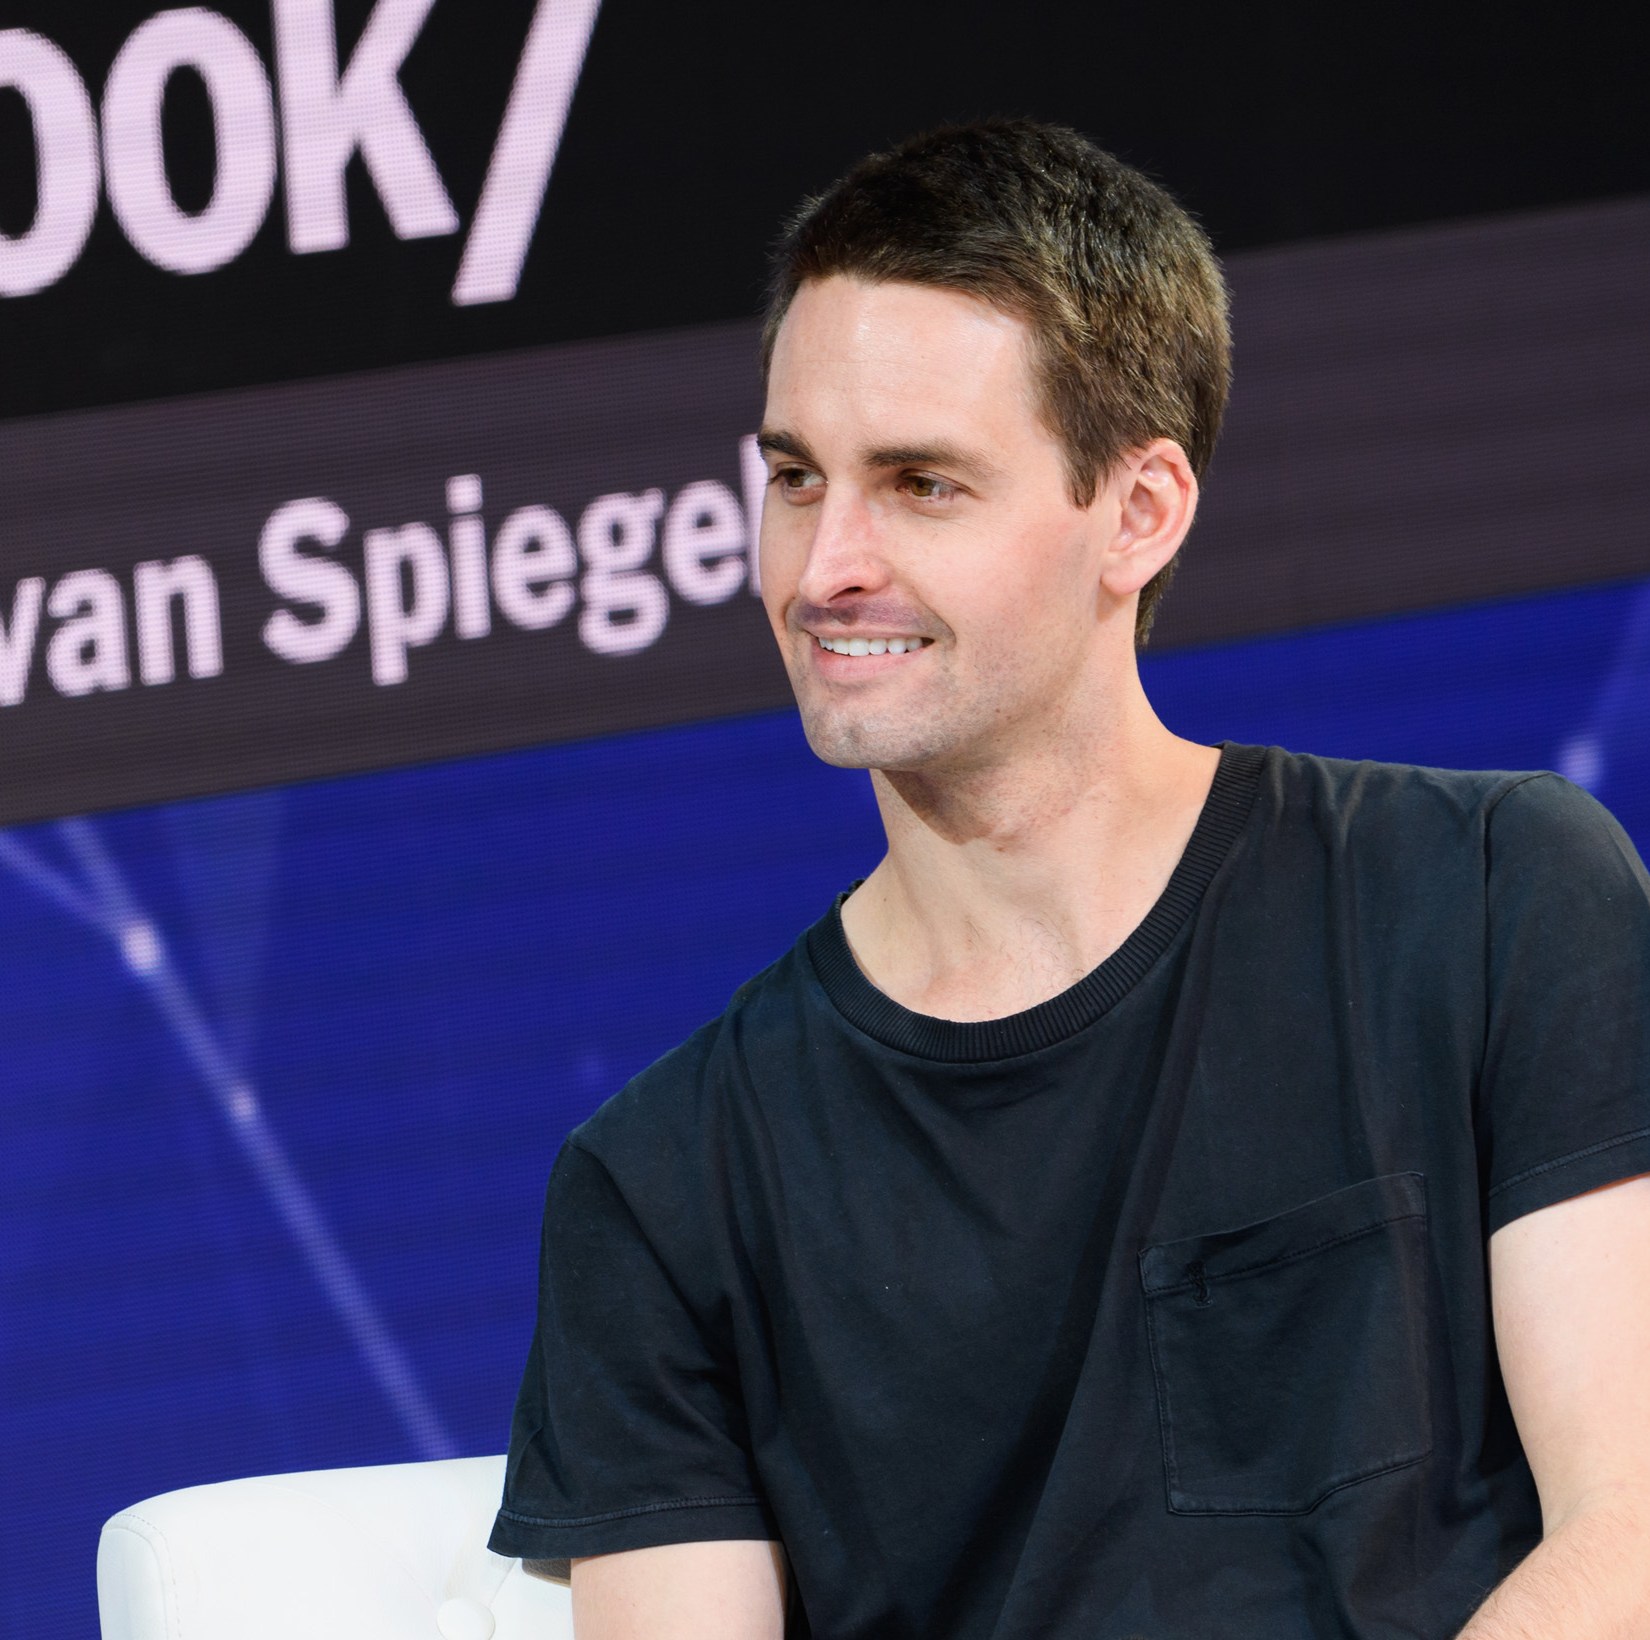 Snap is building an ad network to run ads inside other apps